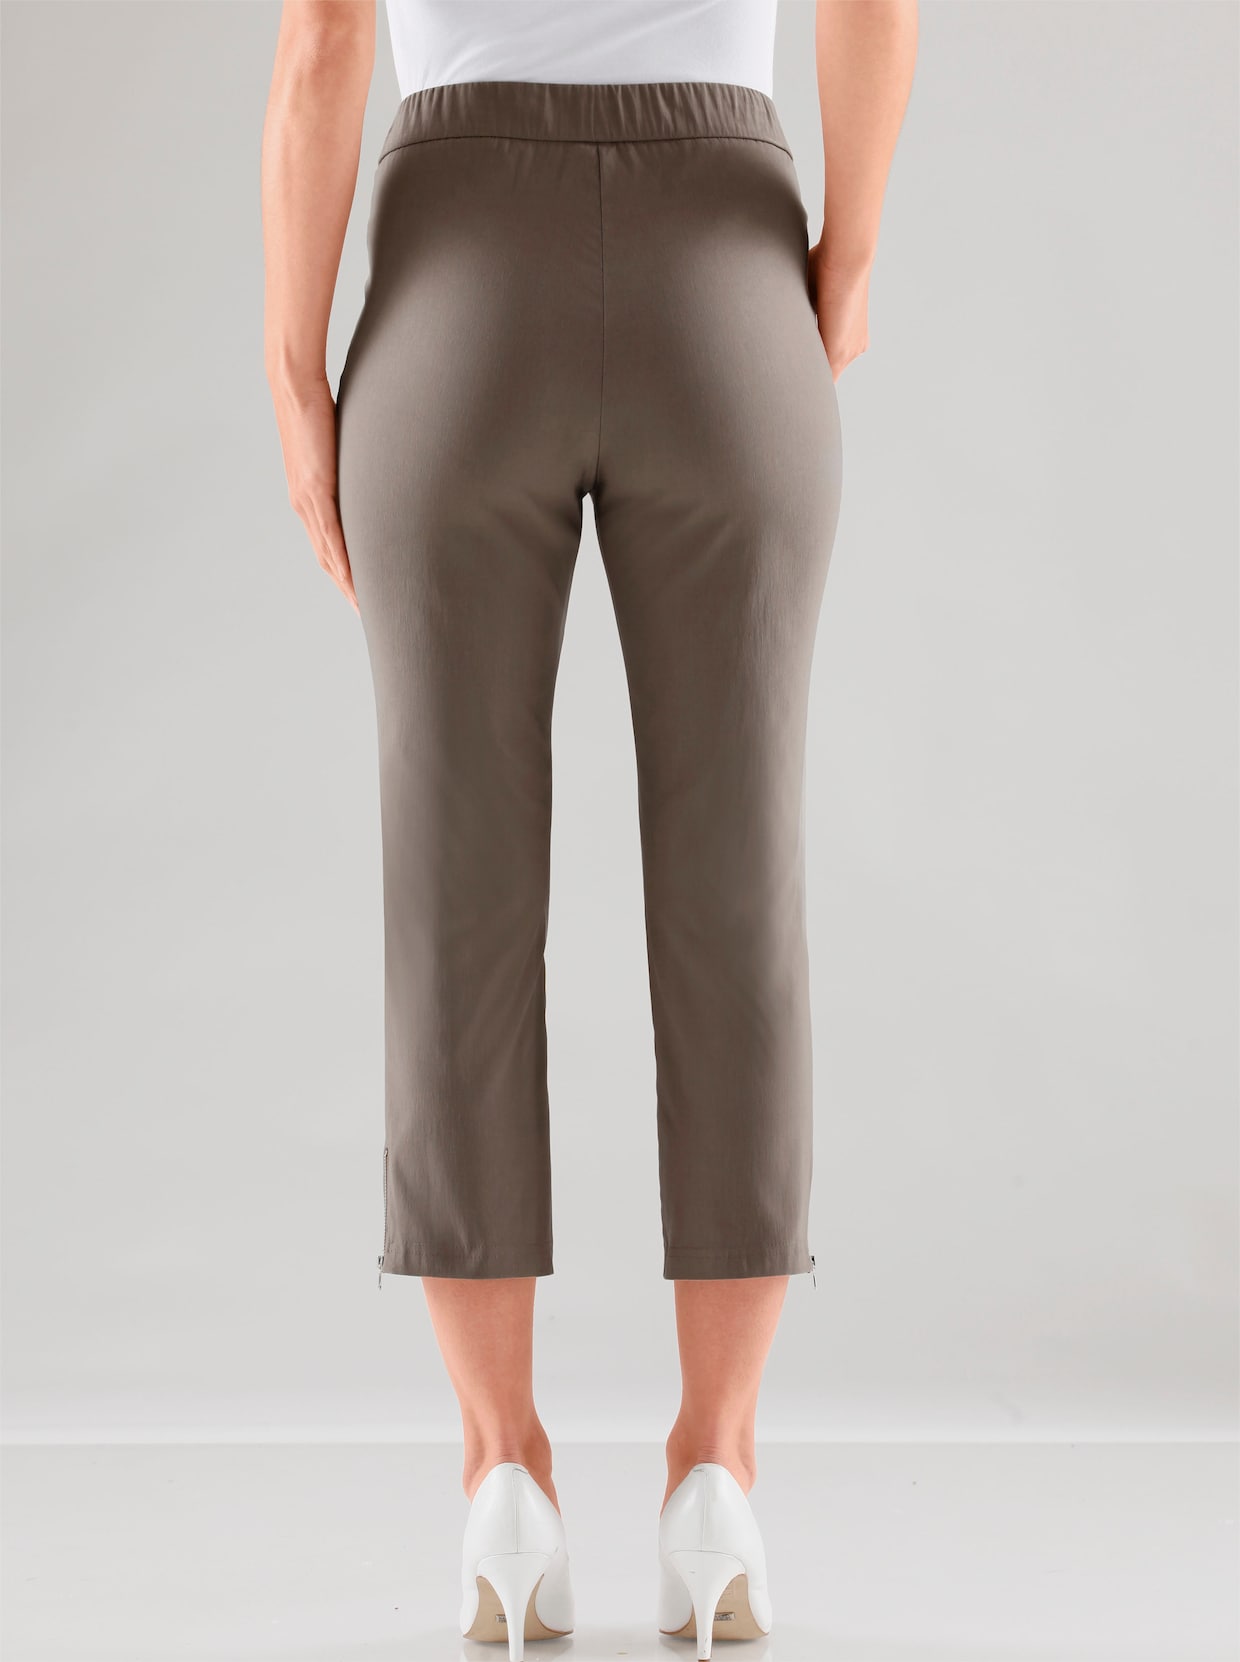 Adelina by Scheiter 7/8-Hose - taupe